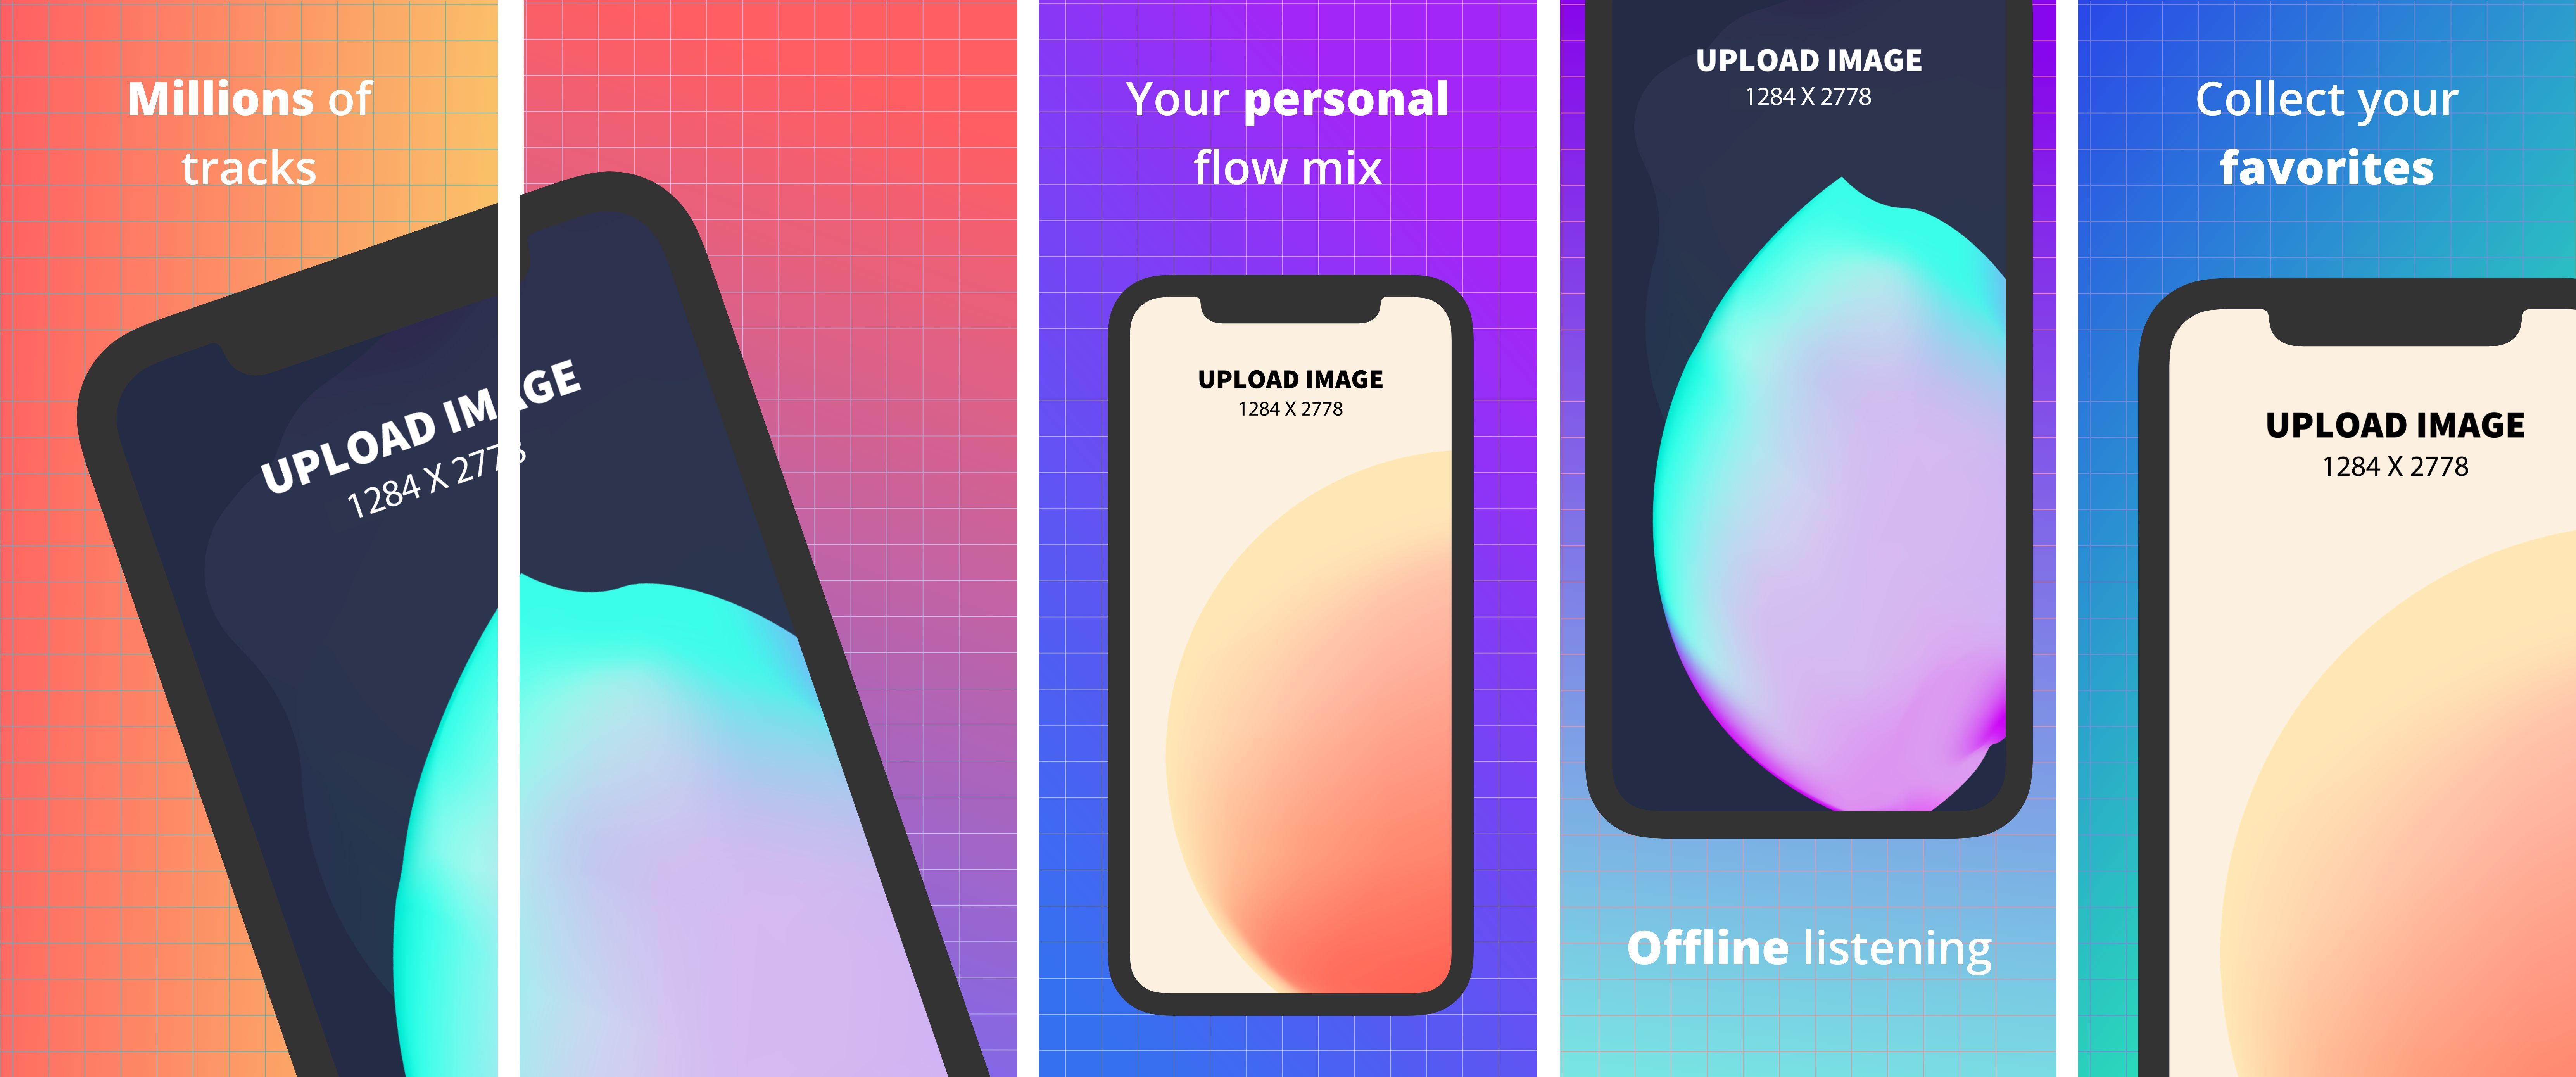 This is an App Store panorama screenshot featuring multiple iPhone XS Max devices accented by coherently diverse gradient backgrounds. The colorful backgrounds grab attention while punchy phrases describe key features of the app.